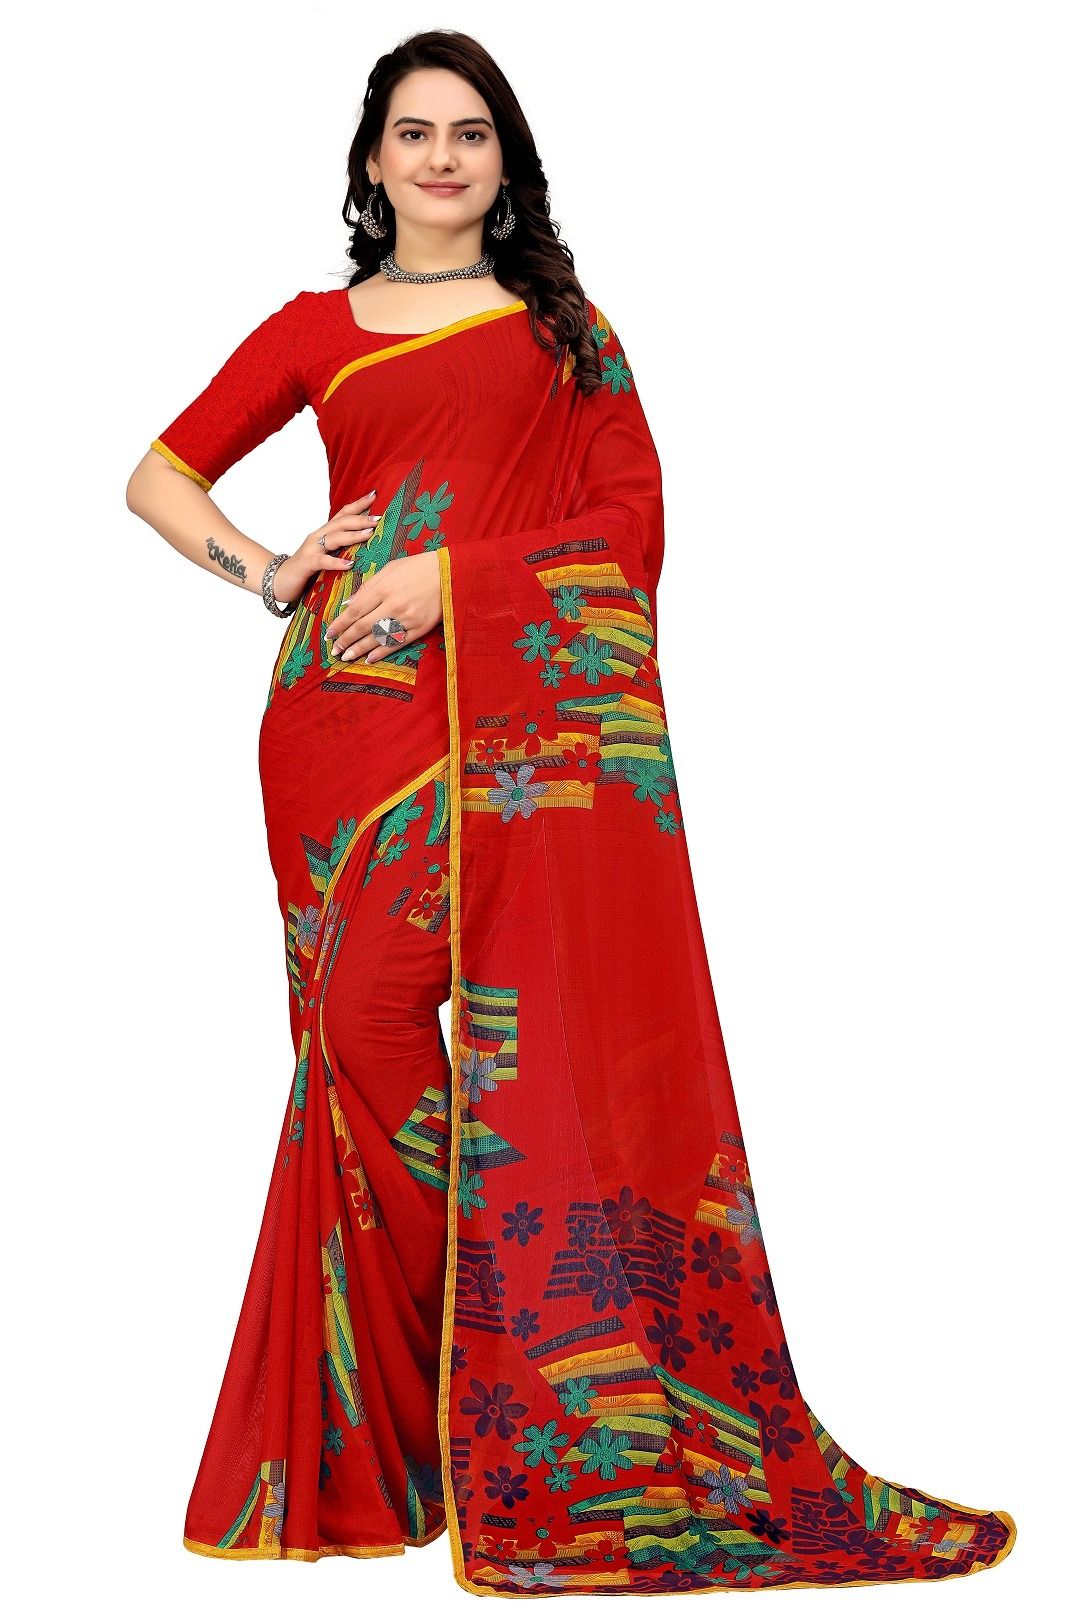 Plain Red and Black Georgette Sarees, 6.5 m at Rs 1999 in Surat | ID:  16535456491